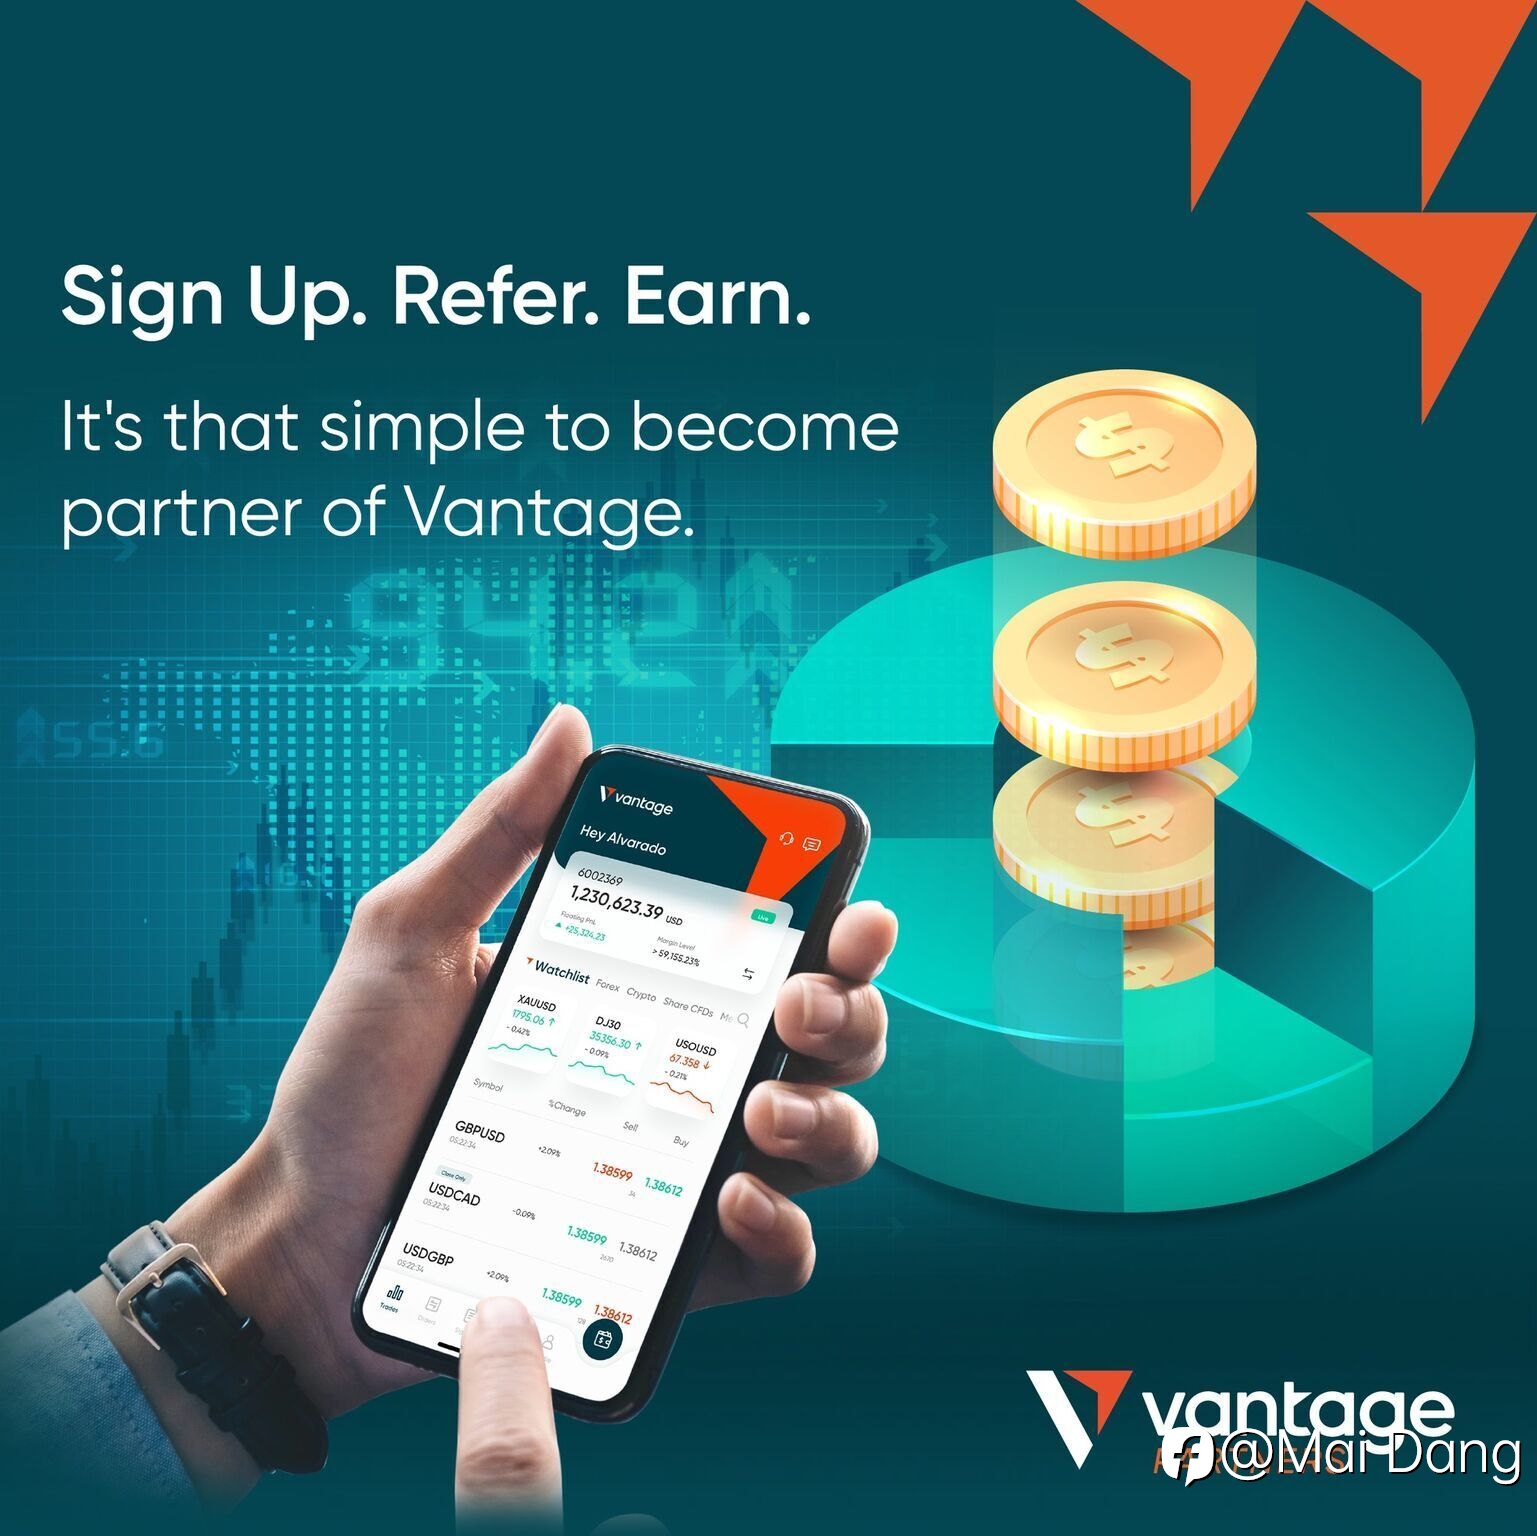 Become Vantage Partner to earn more and more!